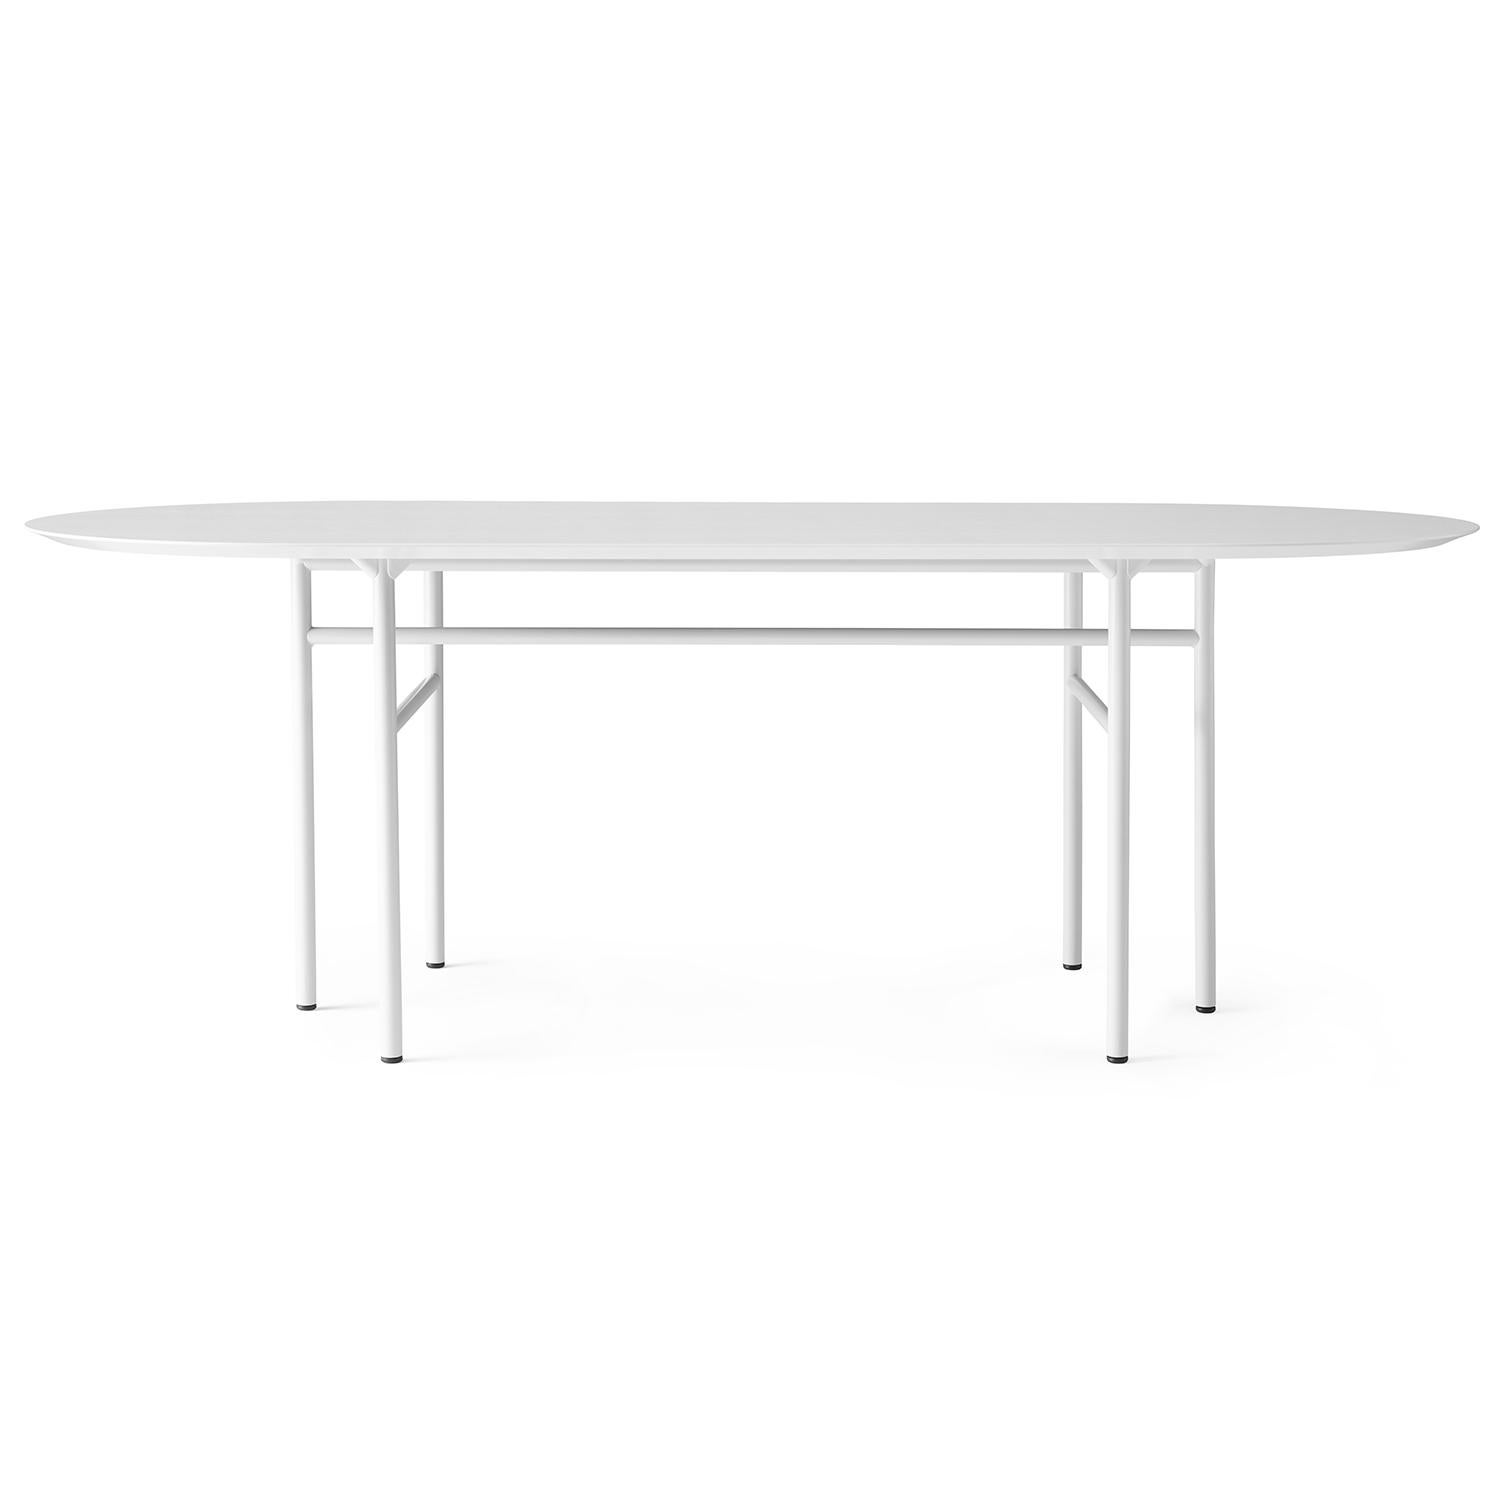 In our humble opinion Snaregade table has the makings of a modern classic. Its beauty lies in being both a timeless design and perfectly practical. Hailed as a true example of form following function, its slender supports are positioned to maximize